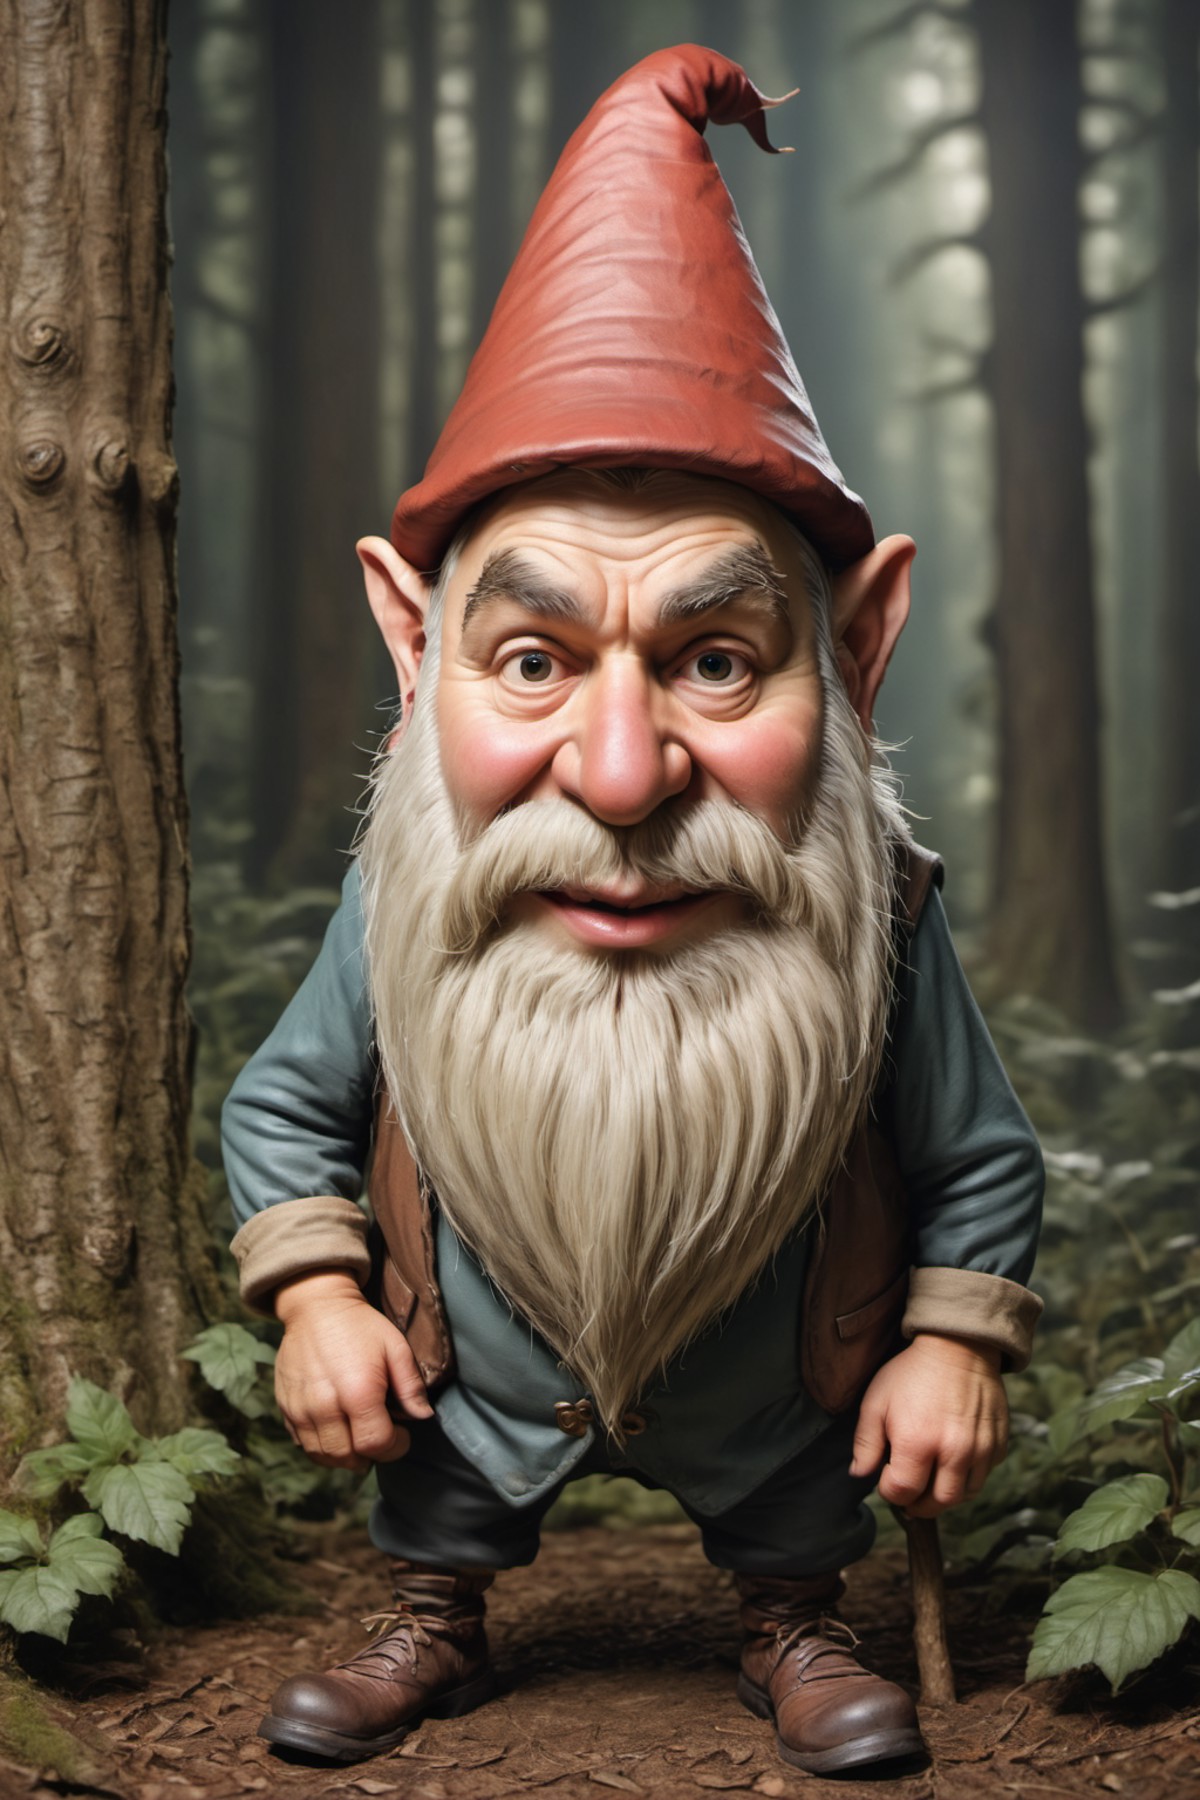 caricature full length portrait of a forest gnome peeking